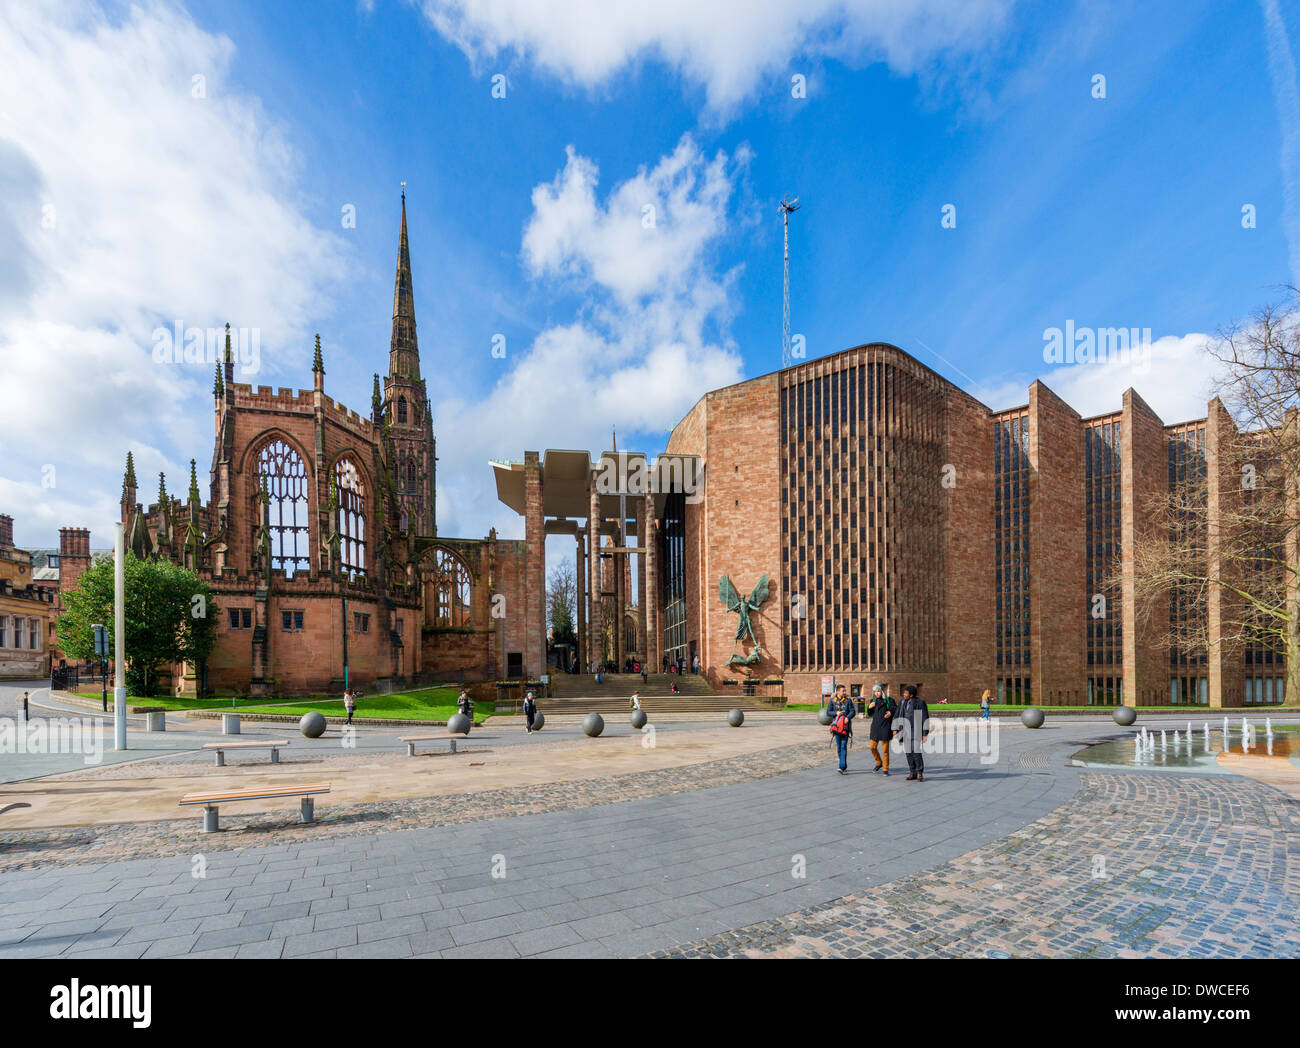 Coventry Cathedral (St Michael's) with bombed out ruins of the old cathedral to the left, Coventry, West Midlands, England, UK Stock Photo